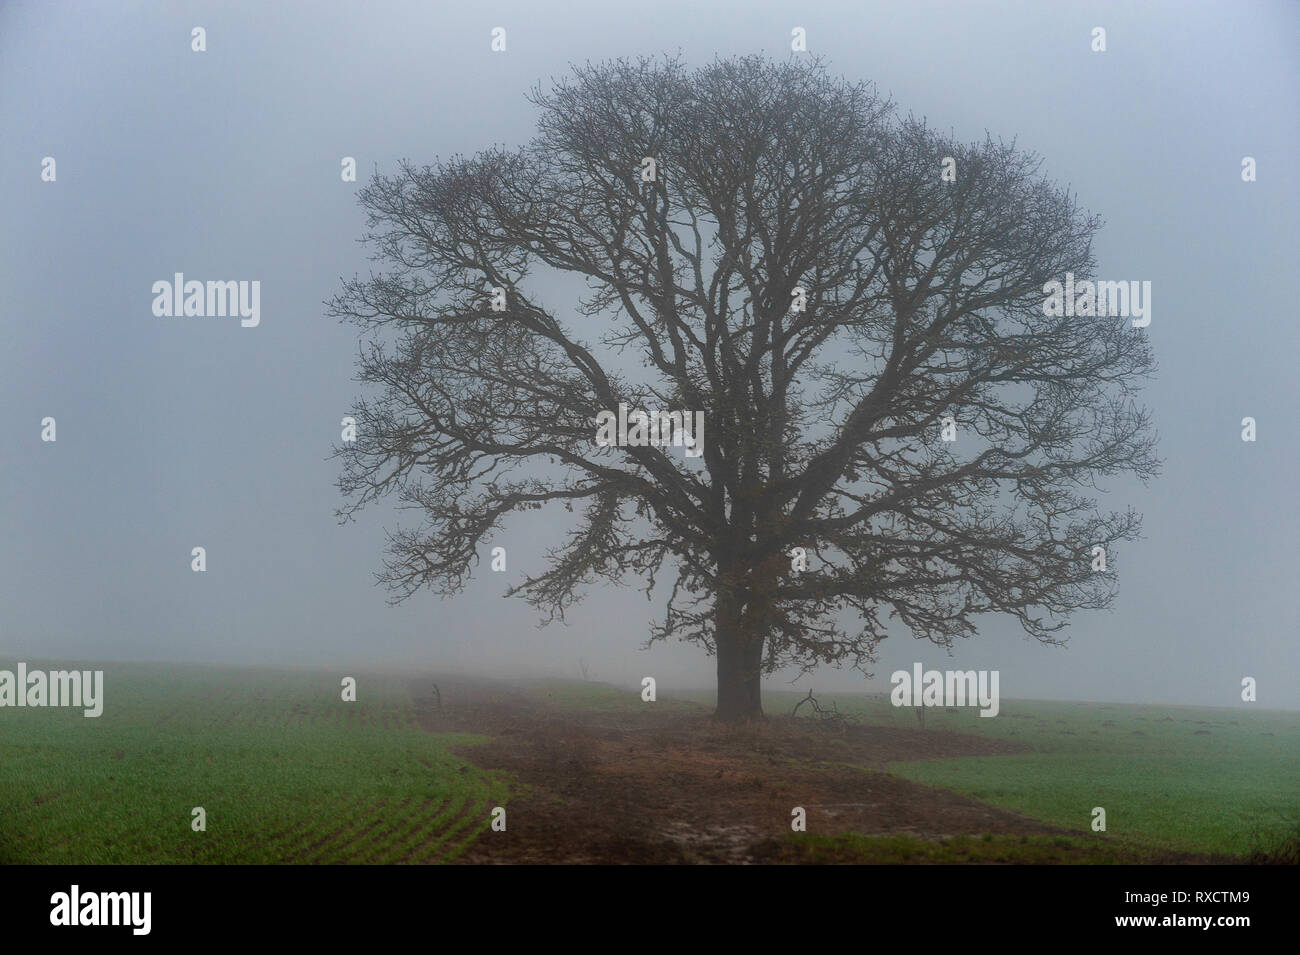 A lone oak stands proud in a field of winter ground cover as fog shrouds the sky. Stock Photo